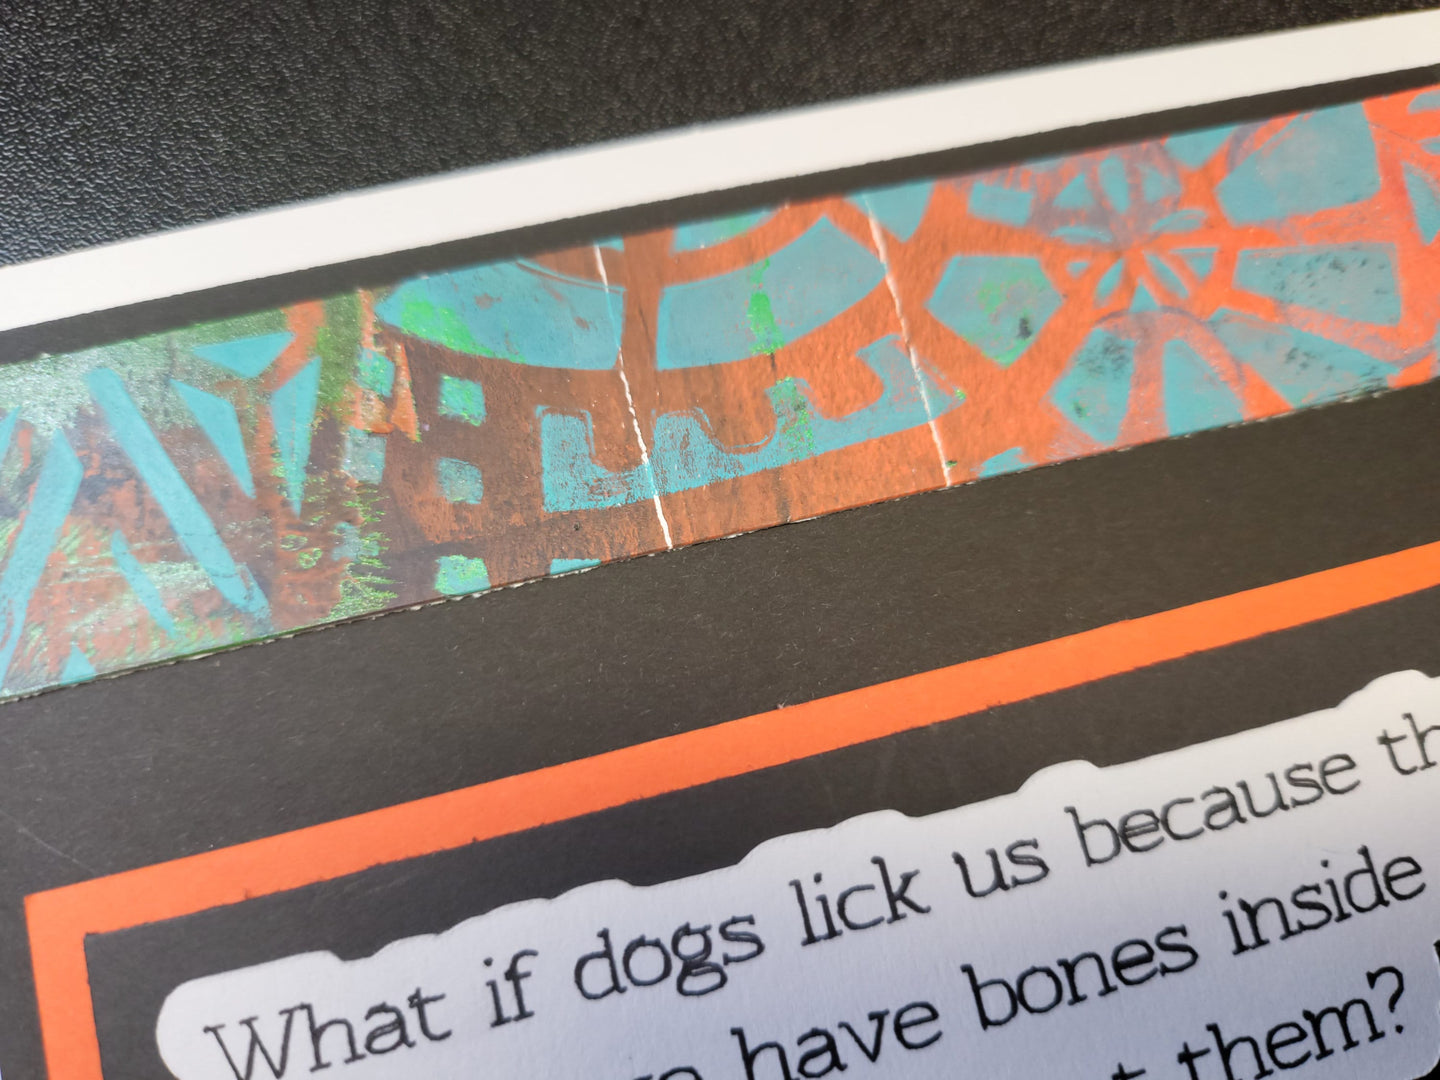 Dogs and Bones (with matching designed envelope) - Funny - Unique Acrylic Monotype